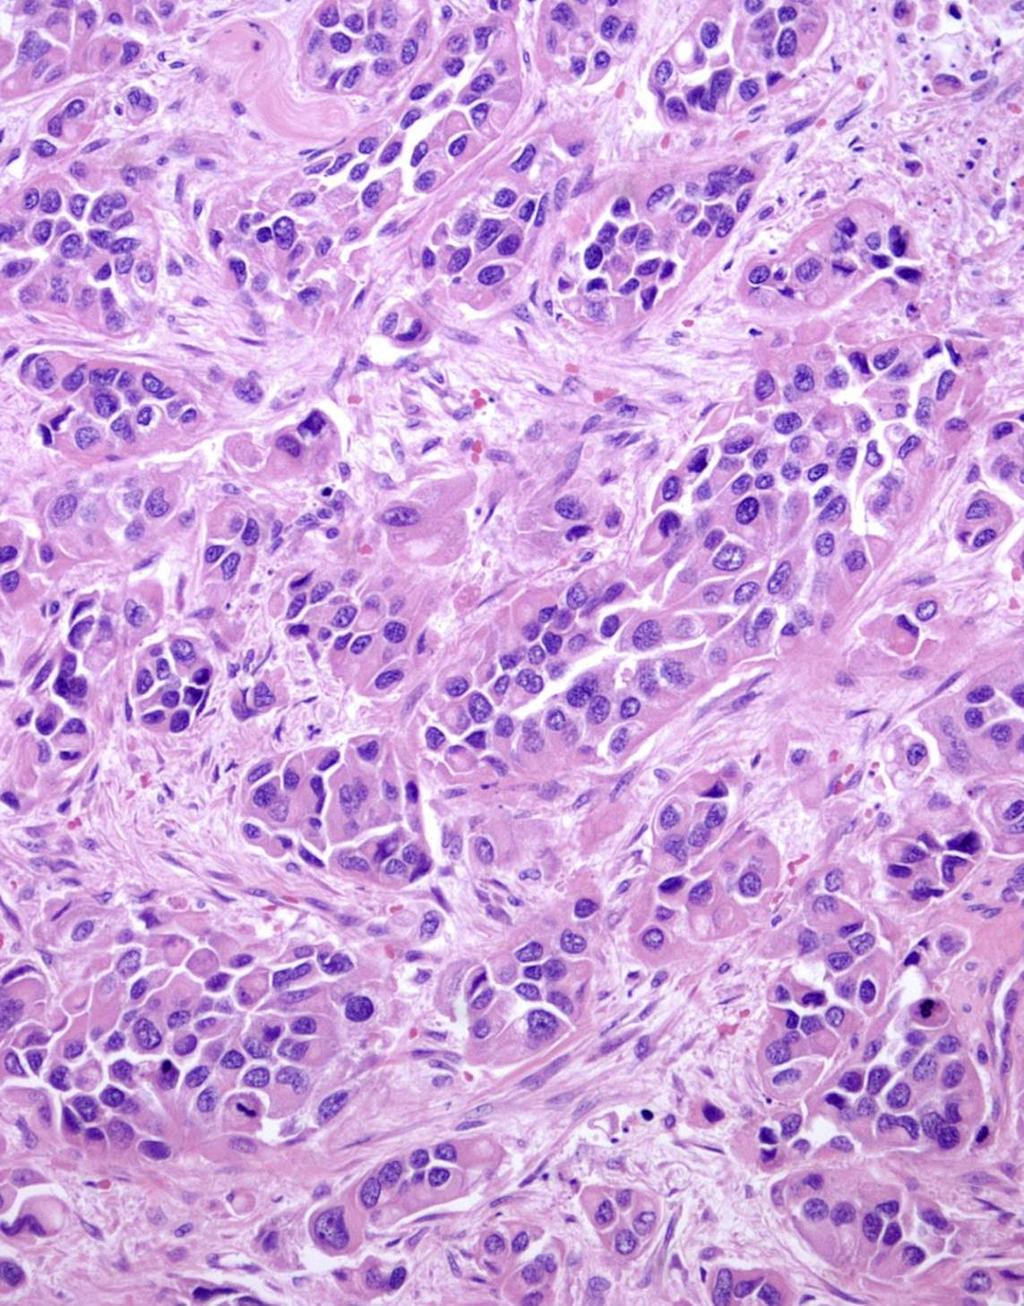 Undifferentiated carcinoma with rhabdoid features Rare tumor, muscle invasive (18 cases reported) Conventional UC component frequently